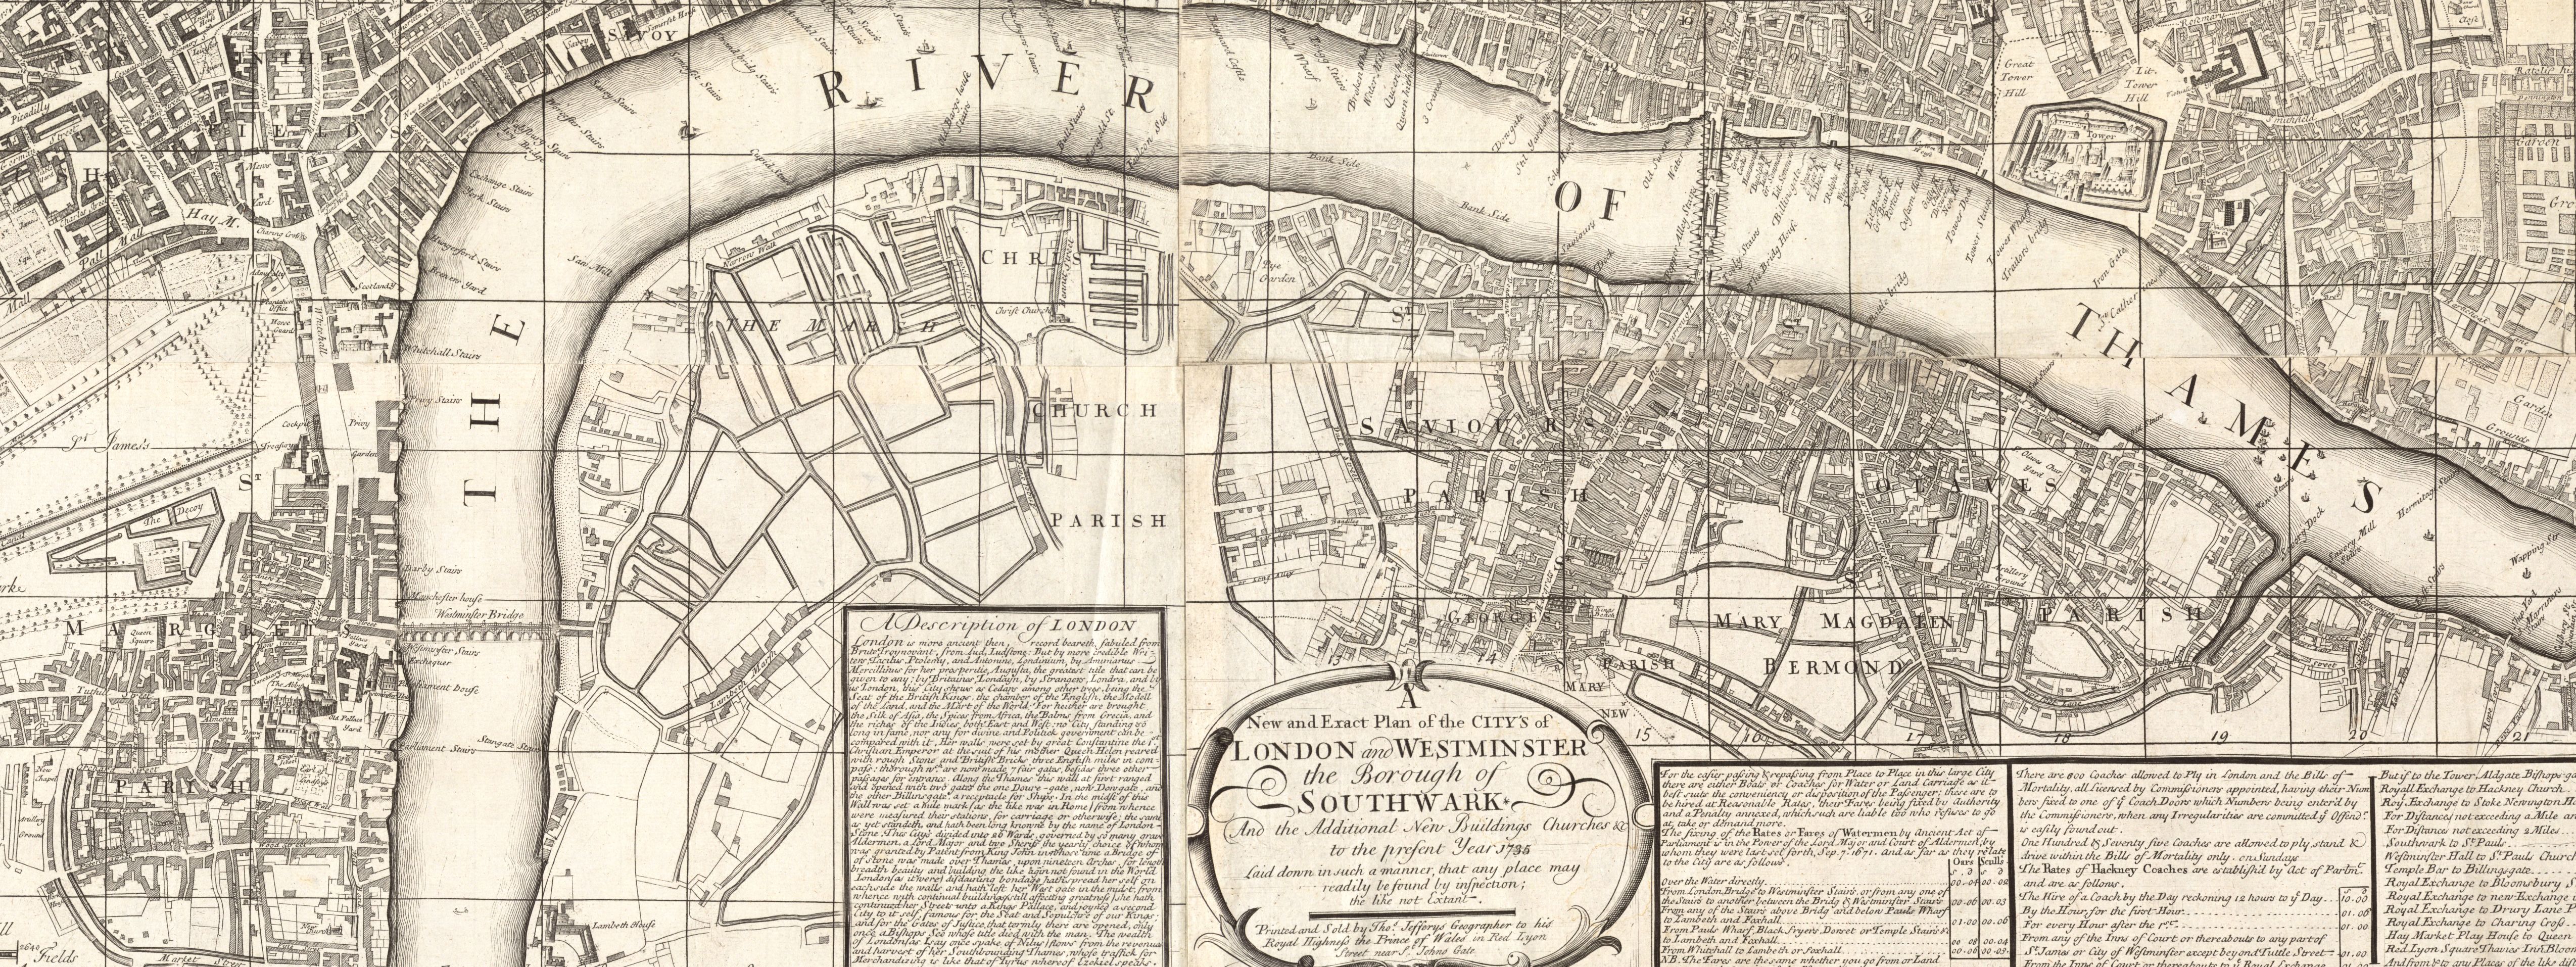 A new and exact plan of the city's of London and Westminster, the borough of Southwark : and the additional new buildings, churches &c. to the present year 1735 laid down in such a manner, that any place may readily be found by inspection; the like no extant